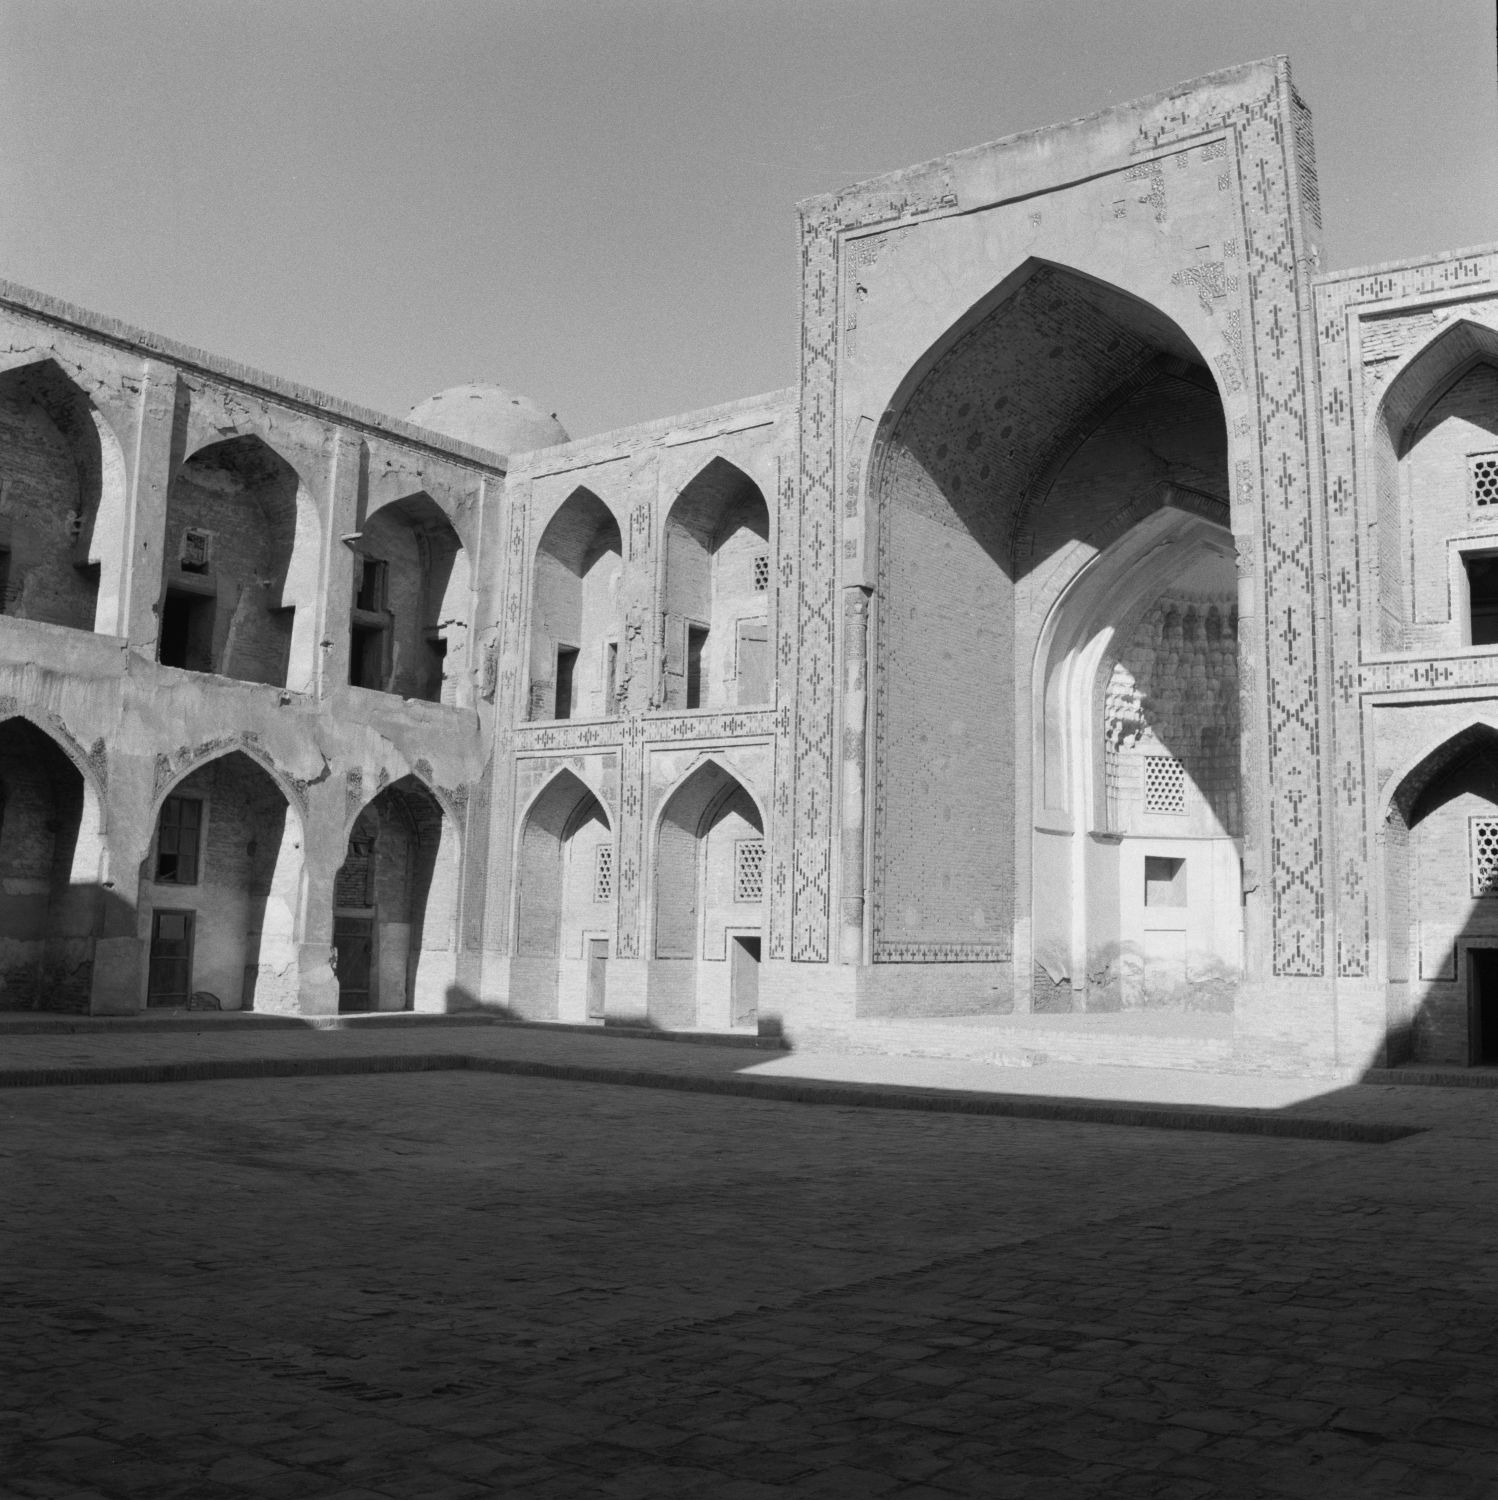 View of courtyard, facing northwest.